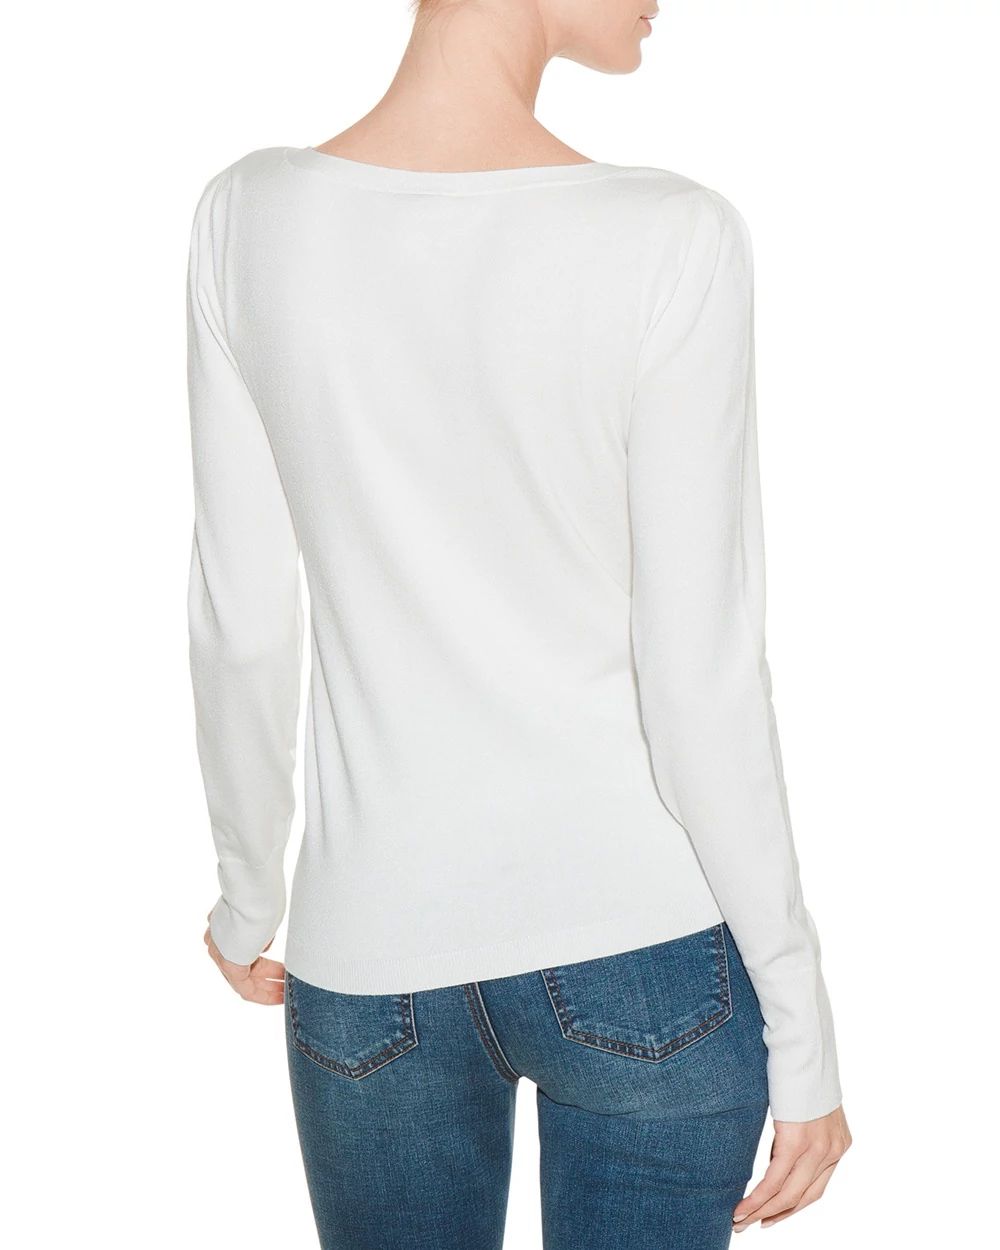 Outlet WHBM Pleat-Sleeve Pullover Sweater click to view larger image.